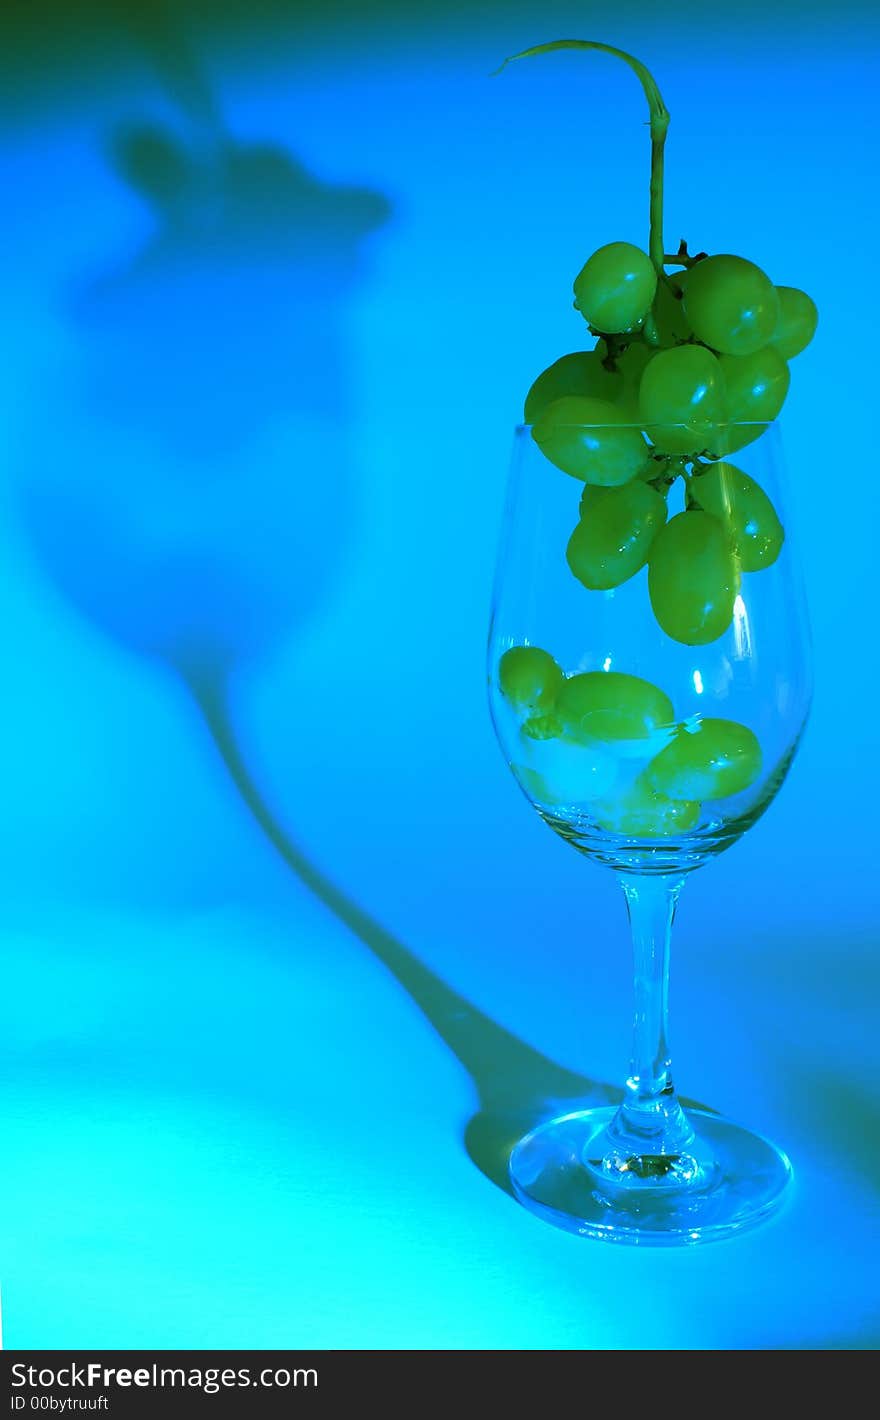 Beaker with the green ripe grapes inside. Beaker with the green ripe grapes inside.